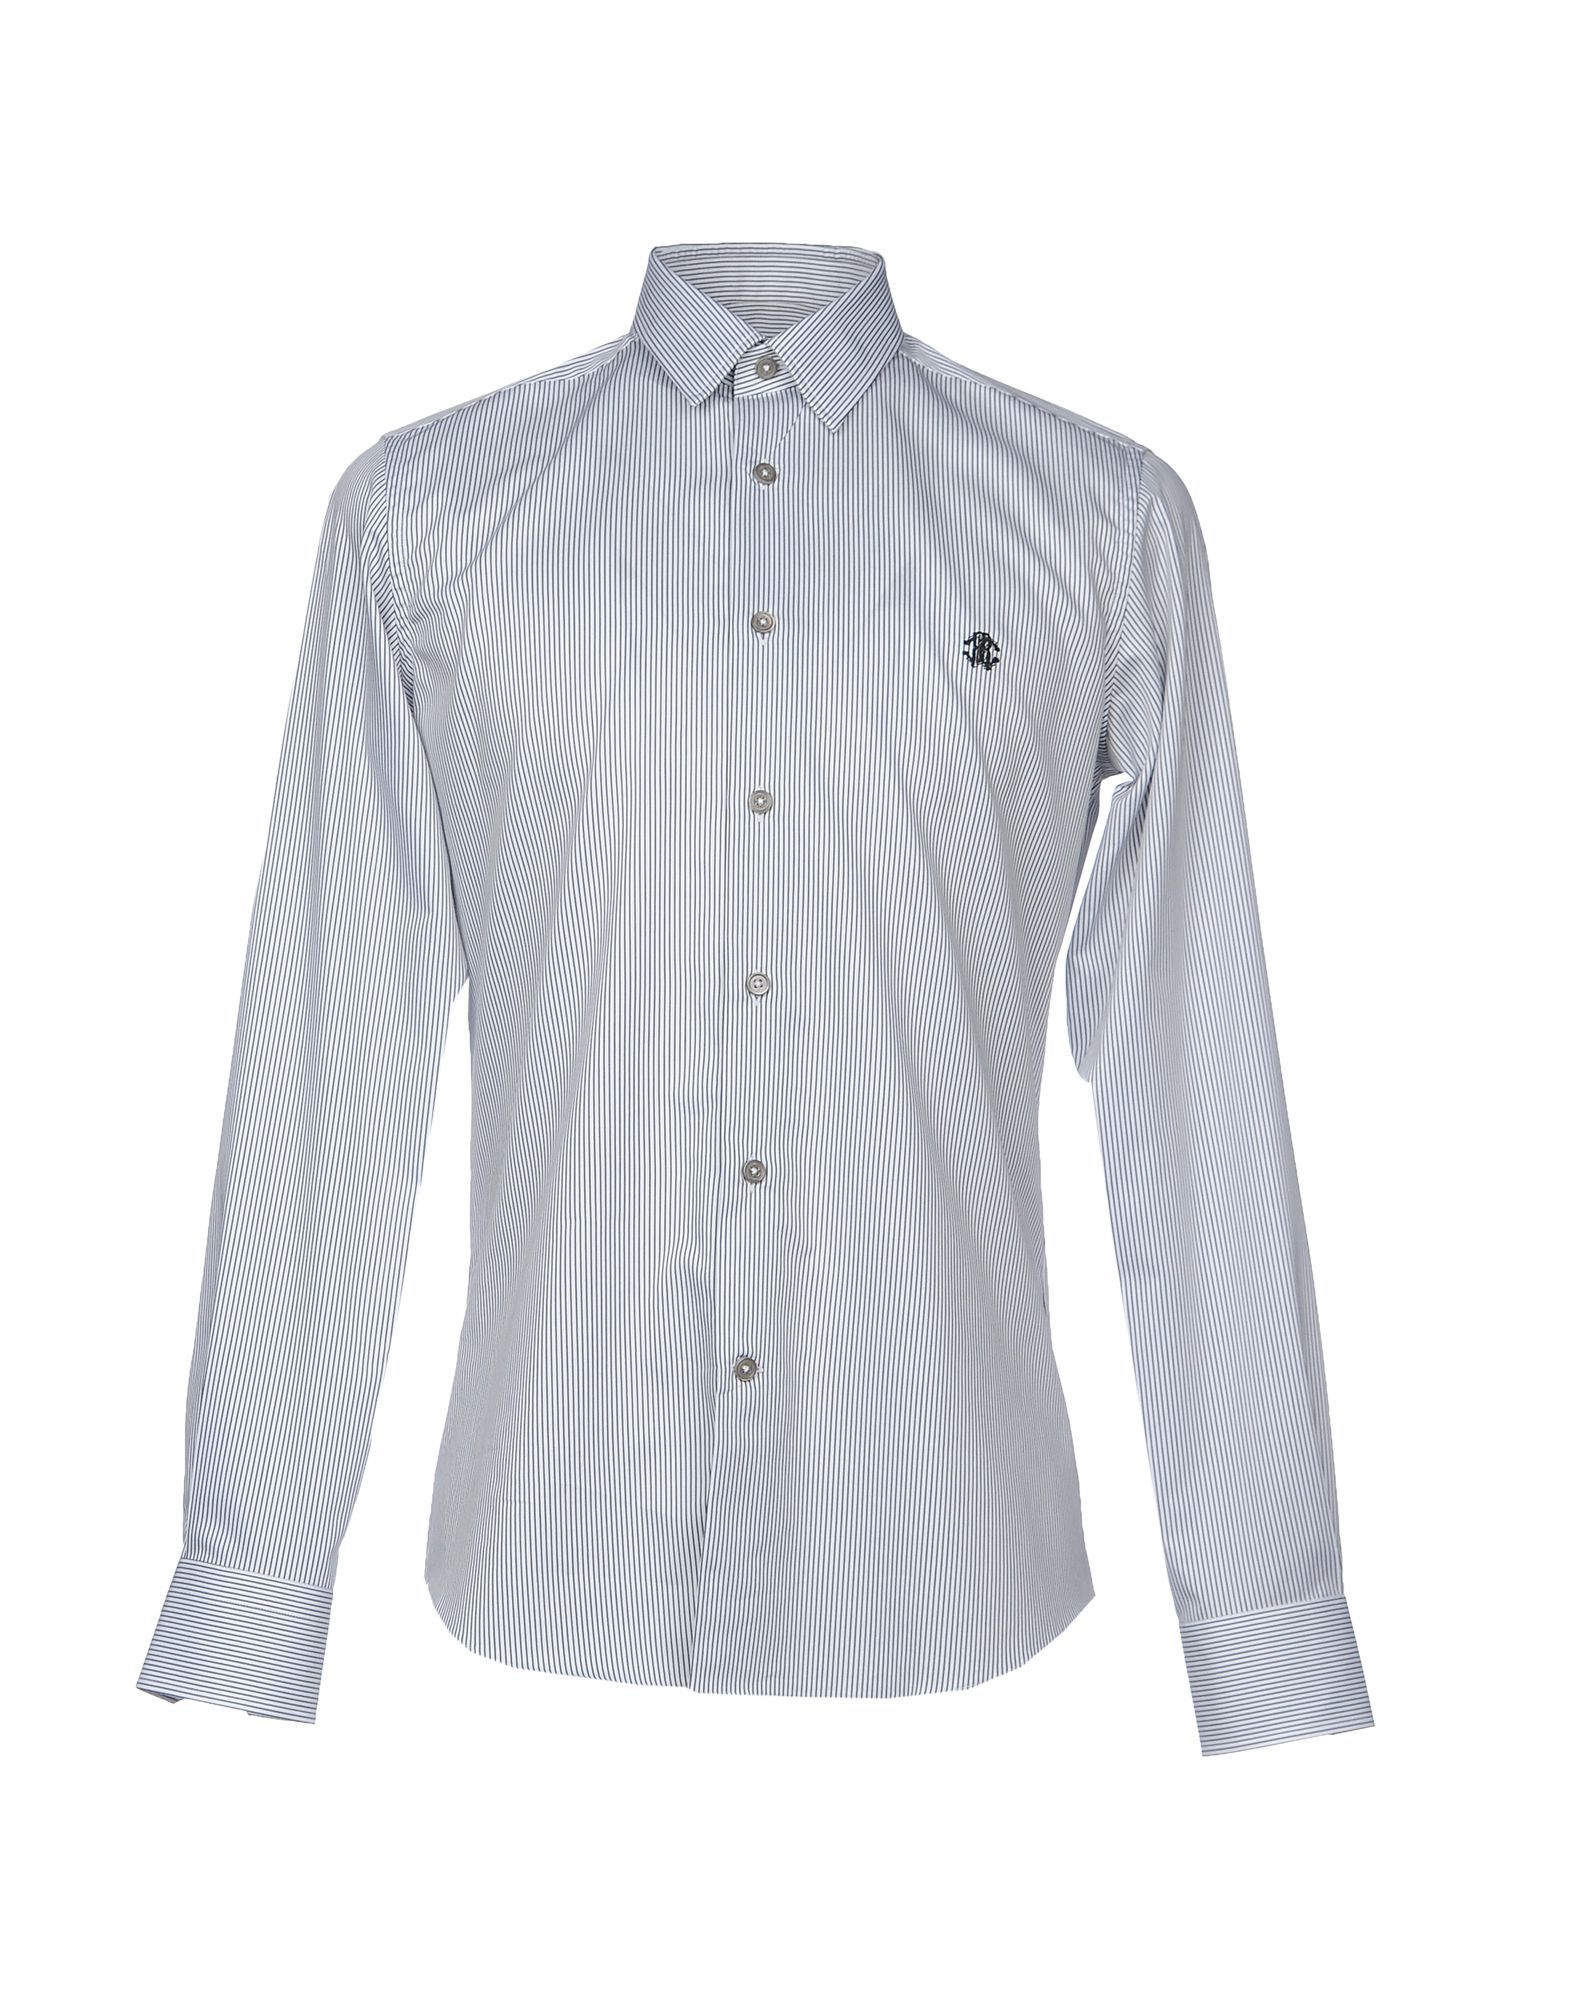 plain weave, logo, stripes, front closure, button closing, long sleeves, buttoned cuffs, classic neckline, no pockets, contains non-textile parts of animal origin, large sized